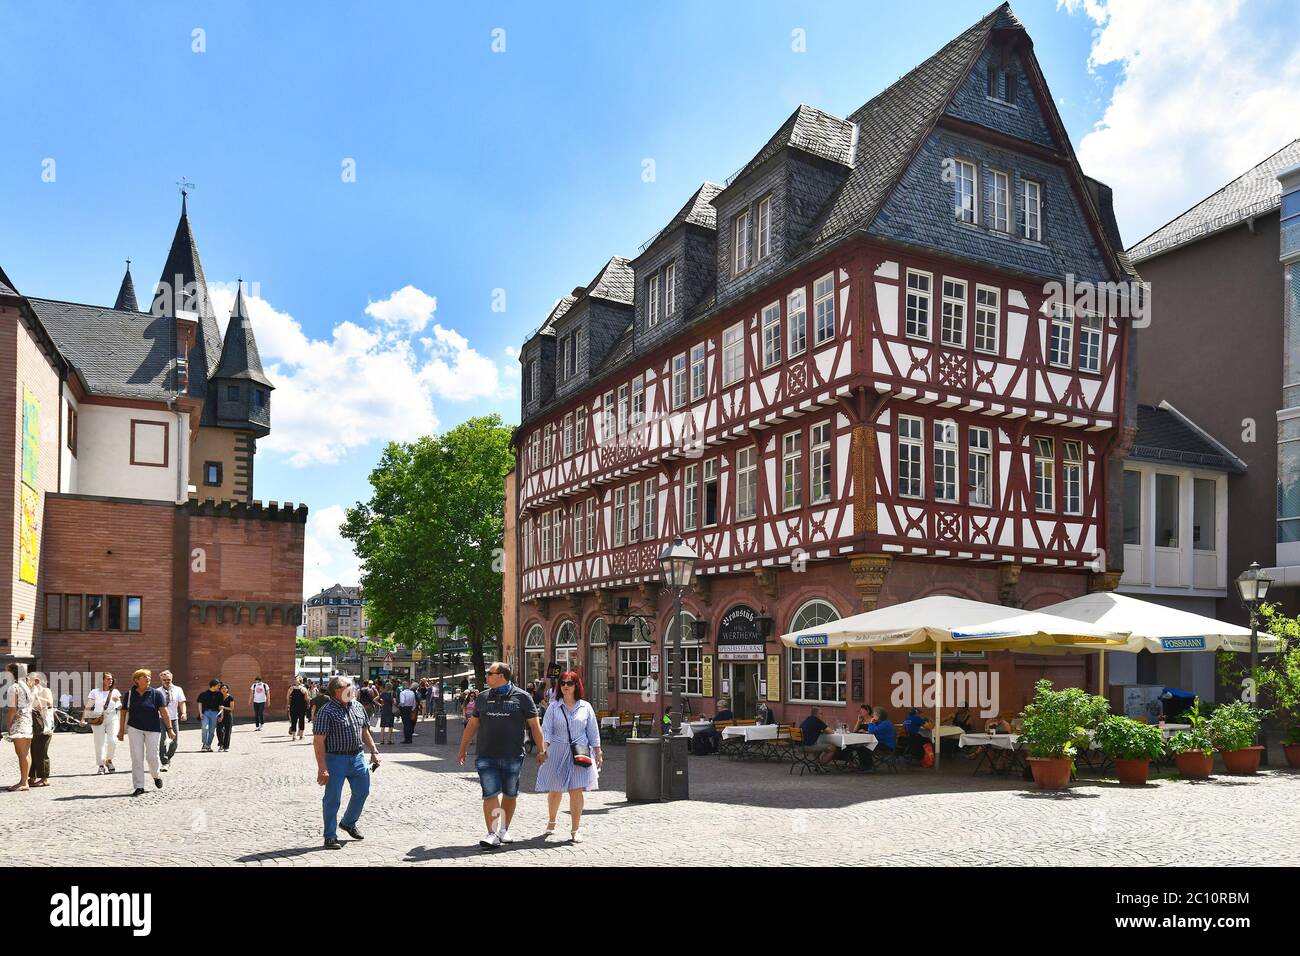 Frankfurt am Main, Germany - June 2020: Old traditional timbered house in historical city center of Frankfurt Stock Photo